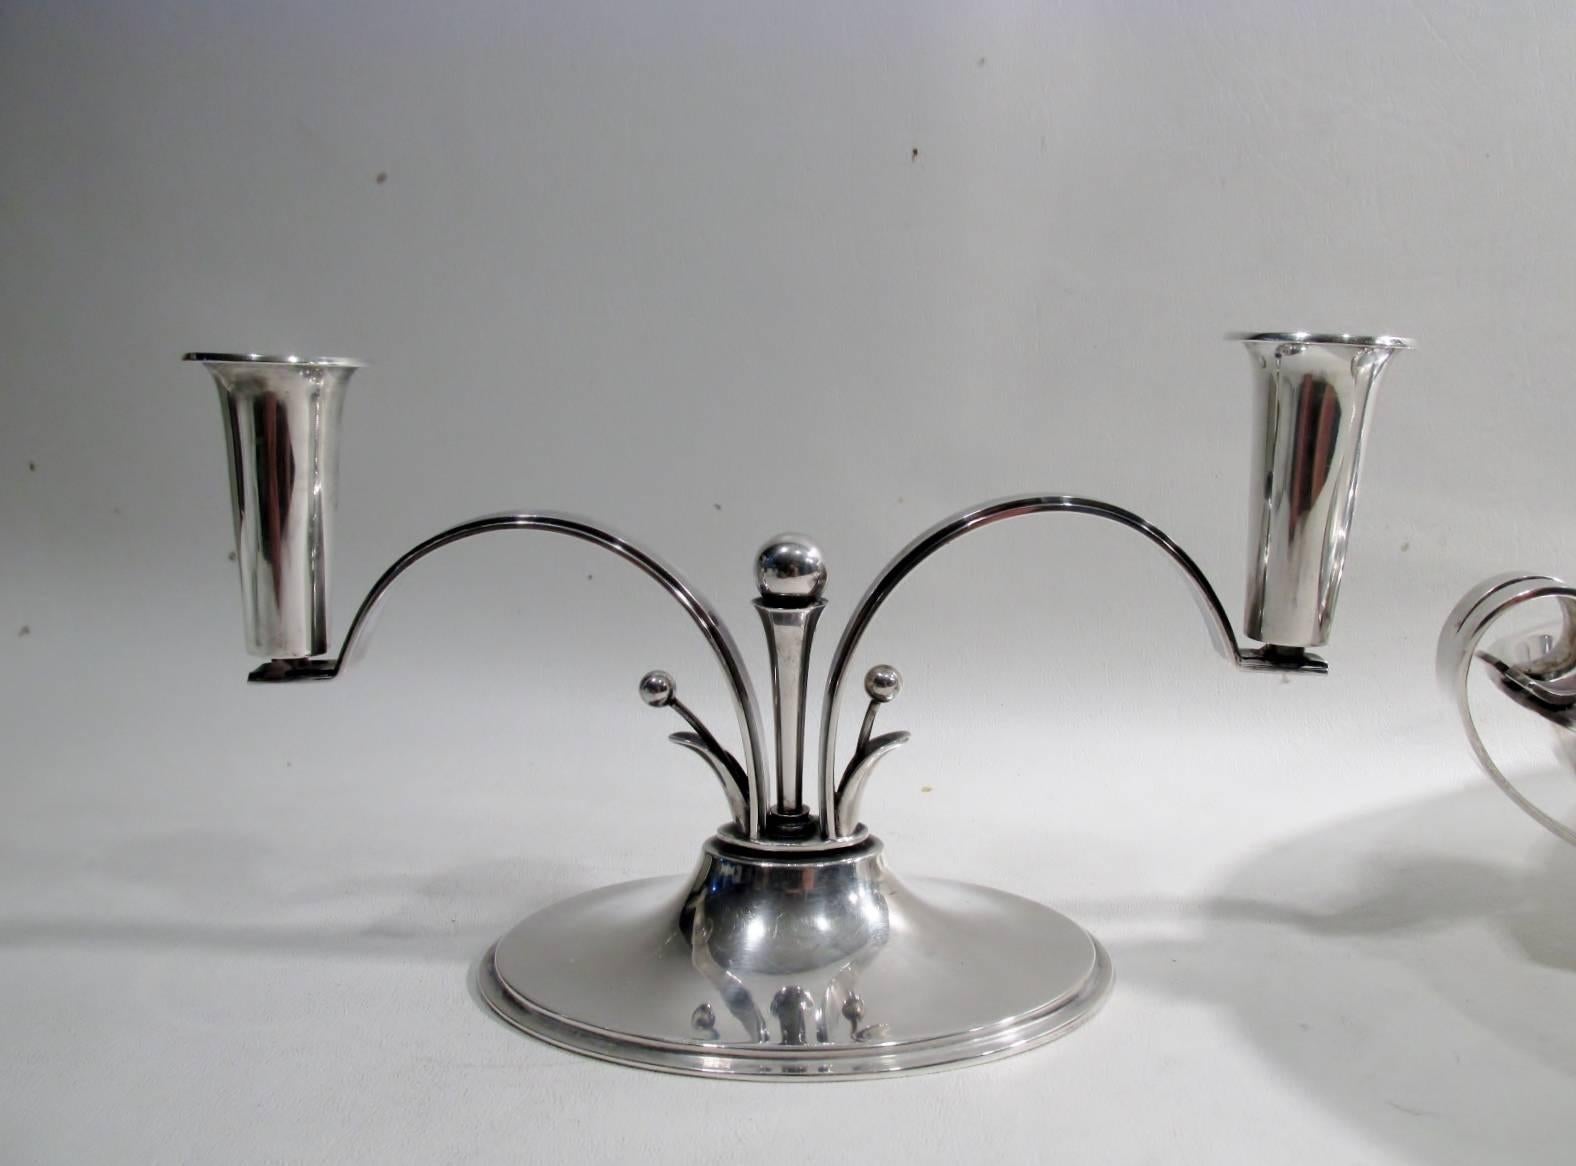 Important and fine three-piece sterling silver Jugendstil table centrepiece set from renowned Danish jeweler Carl. M. Cohr. Comprised of a pair of stylized floral candelabrum with centerpiece bowl. Centrepiece bowl measures approximate 9.5